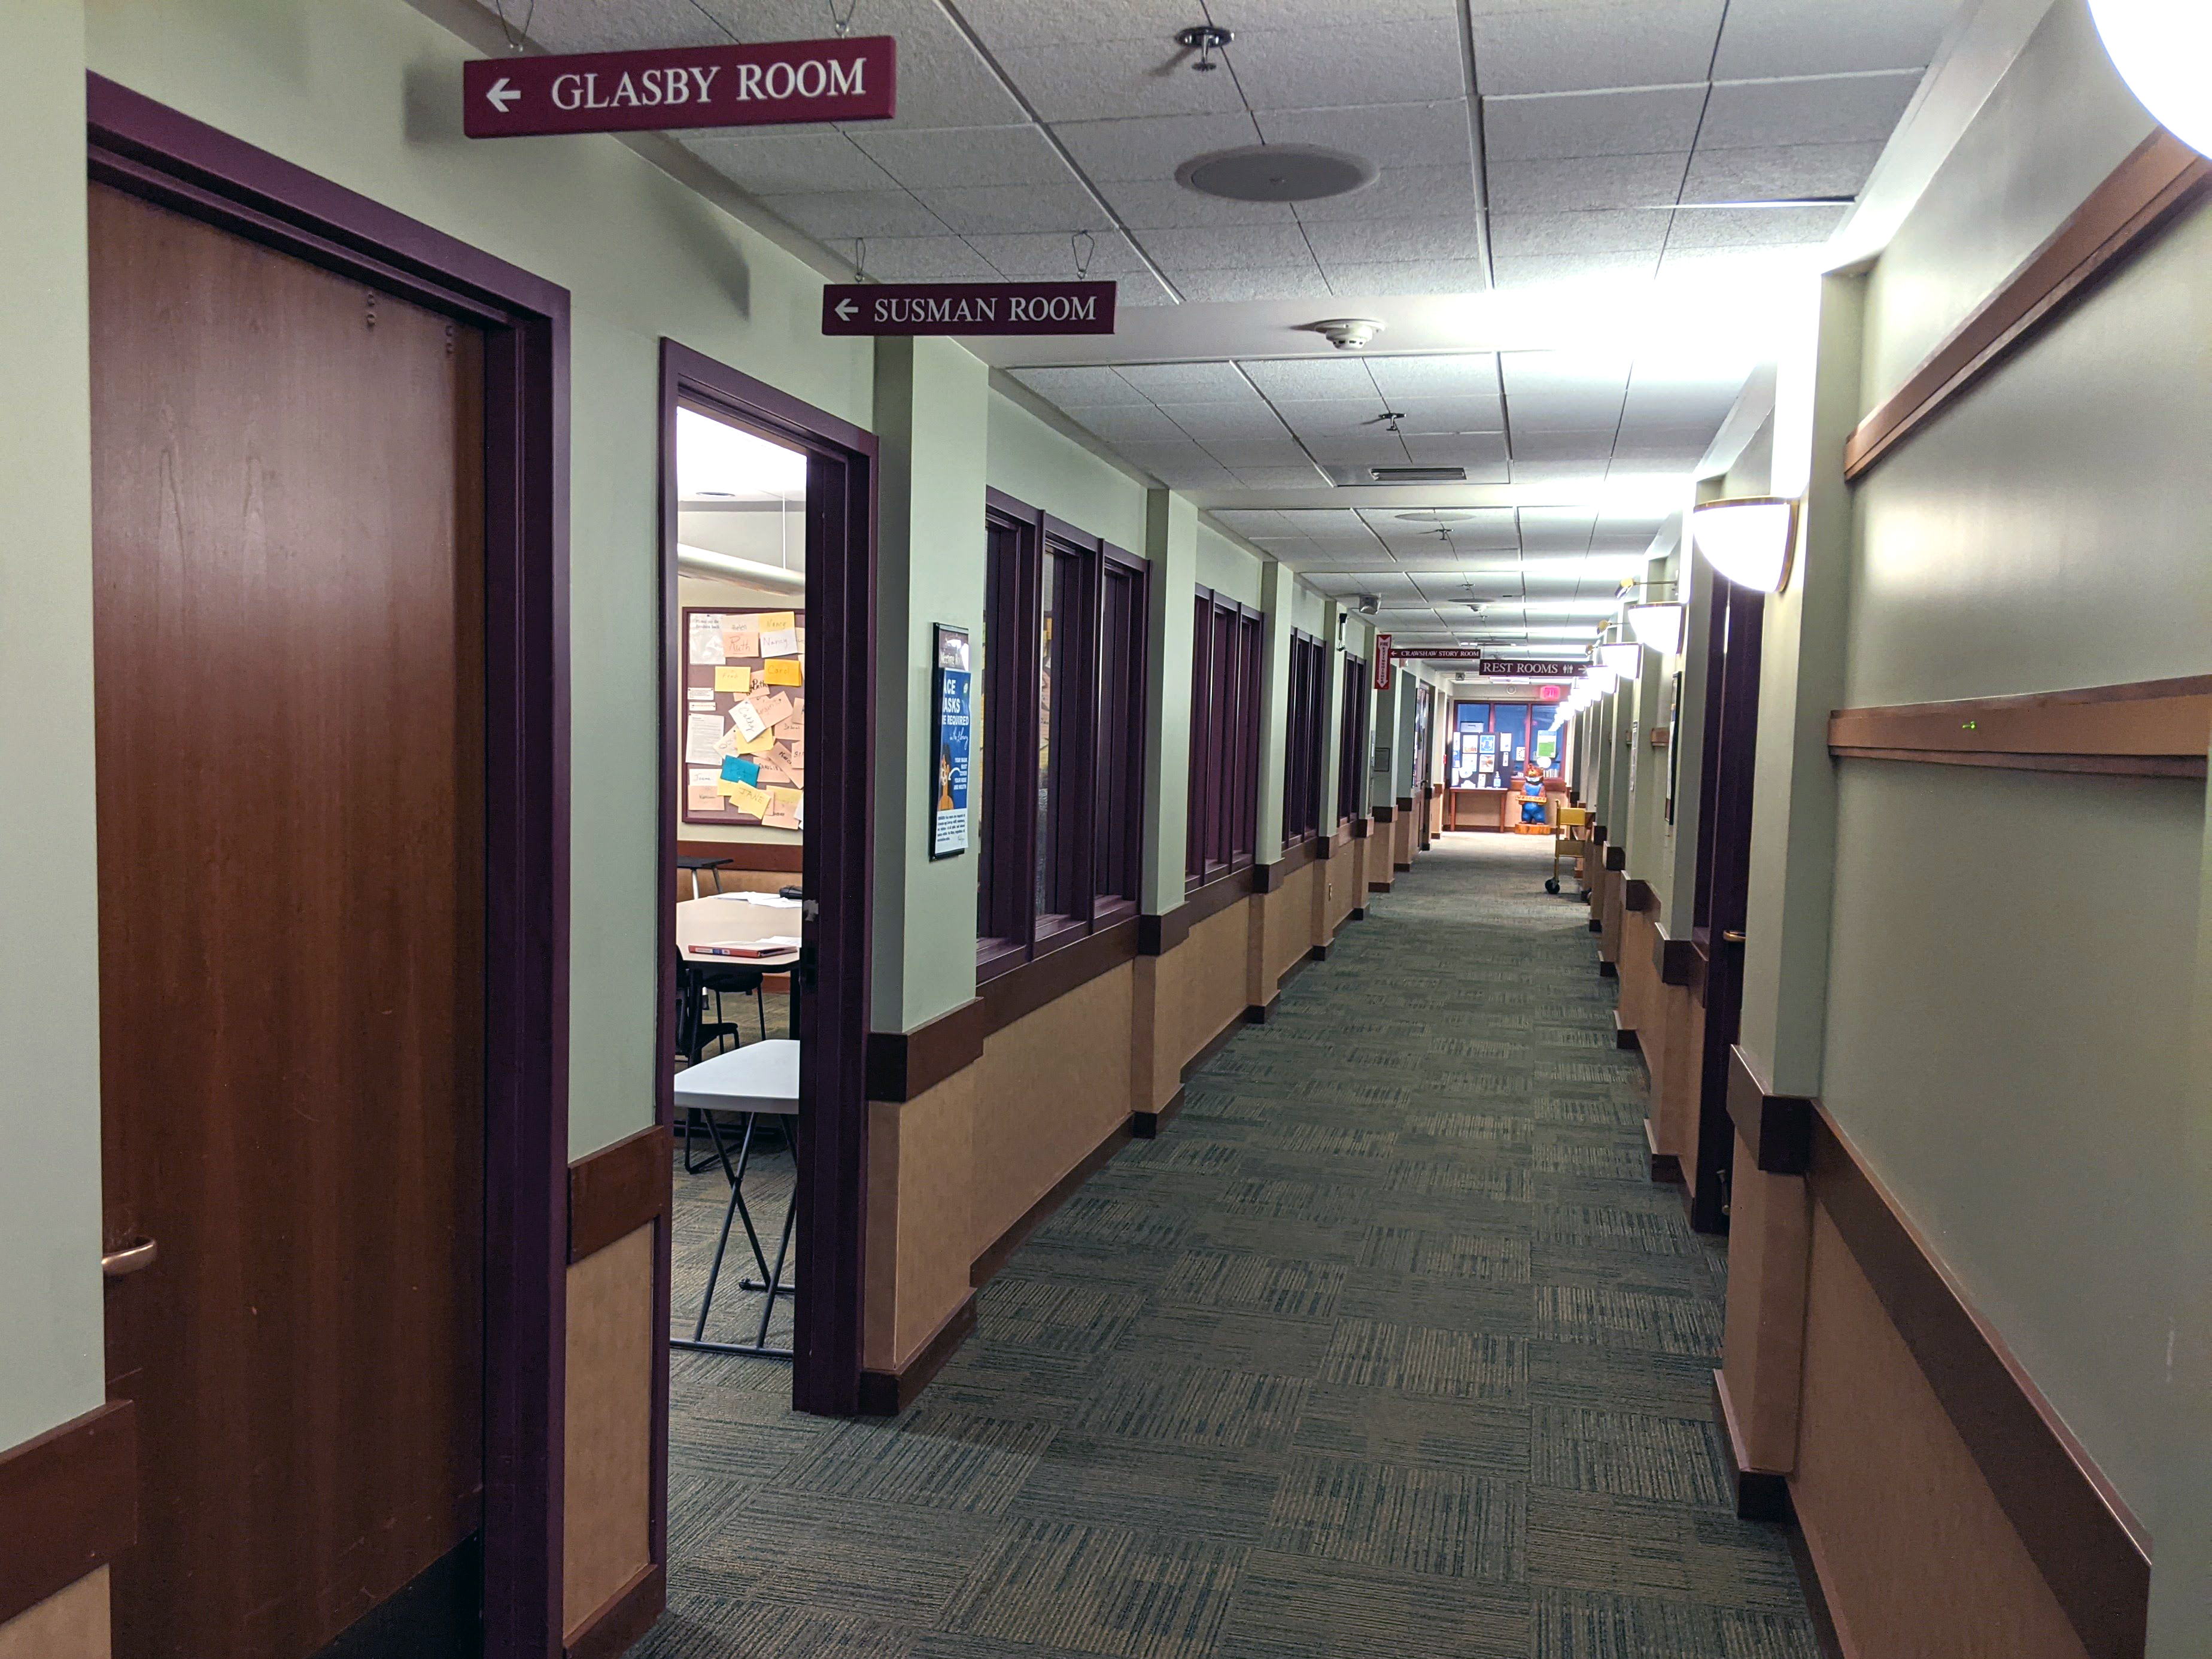 Long hallway with a doorway sign pointing to the Glasby Room entrance.